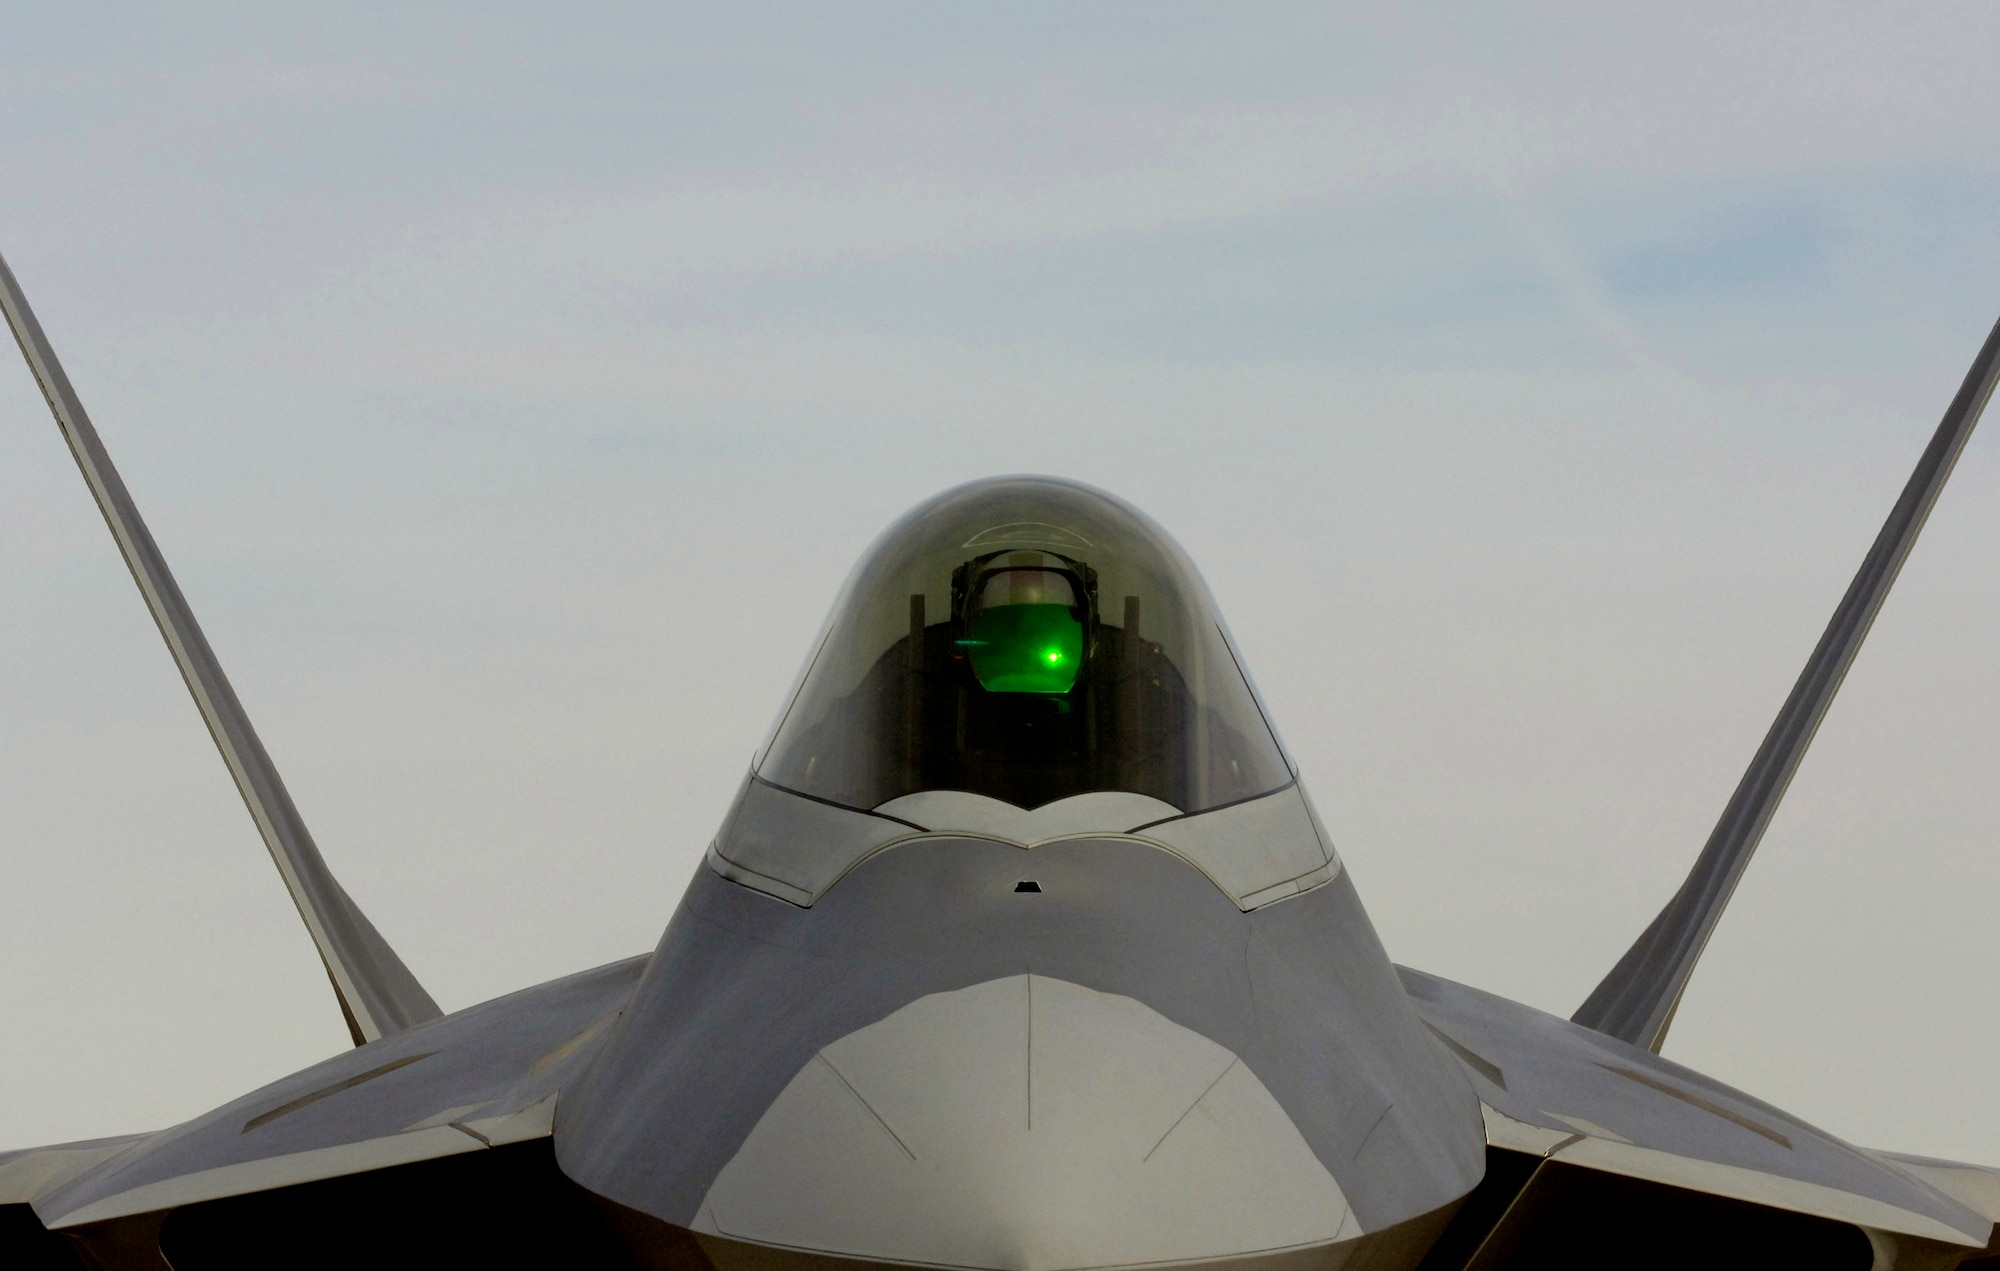 An F-22 Raptor from 94th Fighter Squadron at Langley Air Force Base, Va., sits on the flightline during Red Flag Feb. 6 at Nellis AFB, Nev. The exercise sharpens aircrews' warfighting skills in realistic combat situations. The aircraft are flying missions day and night at the nearby Nevada Test and Training Range where they simulate an air war. The Air Force and Navy, along with Australia and the United Kingdom militaries, are participating in the exercise. This is the first deployment to Red Flag for the 94th FS with F-22s. (U.S. Air Force photo/Master Sgt. Kevin J. Gruenwald) 